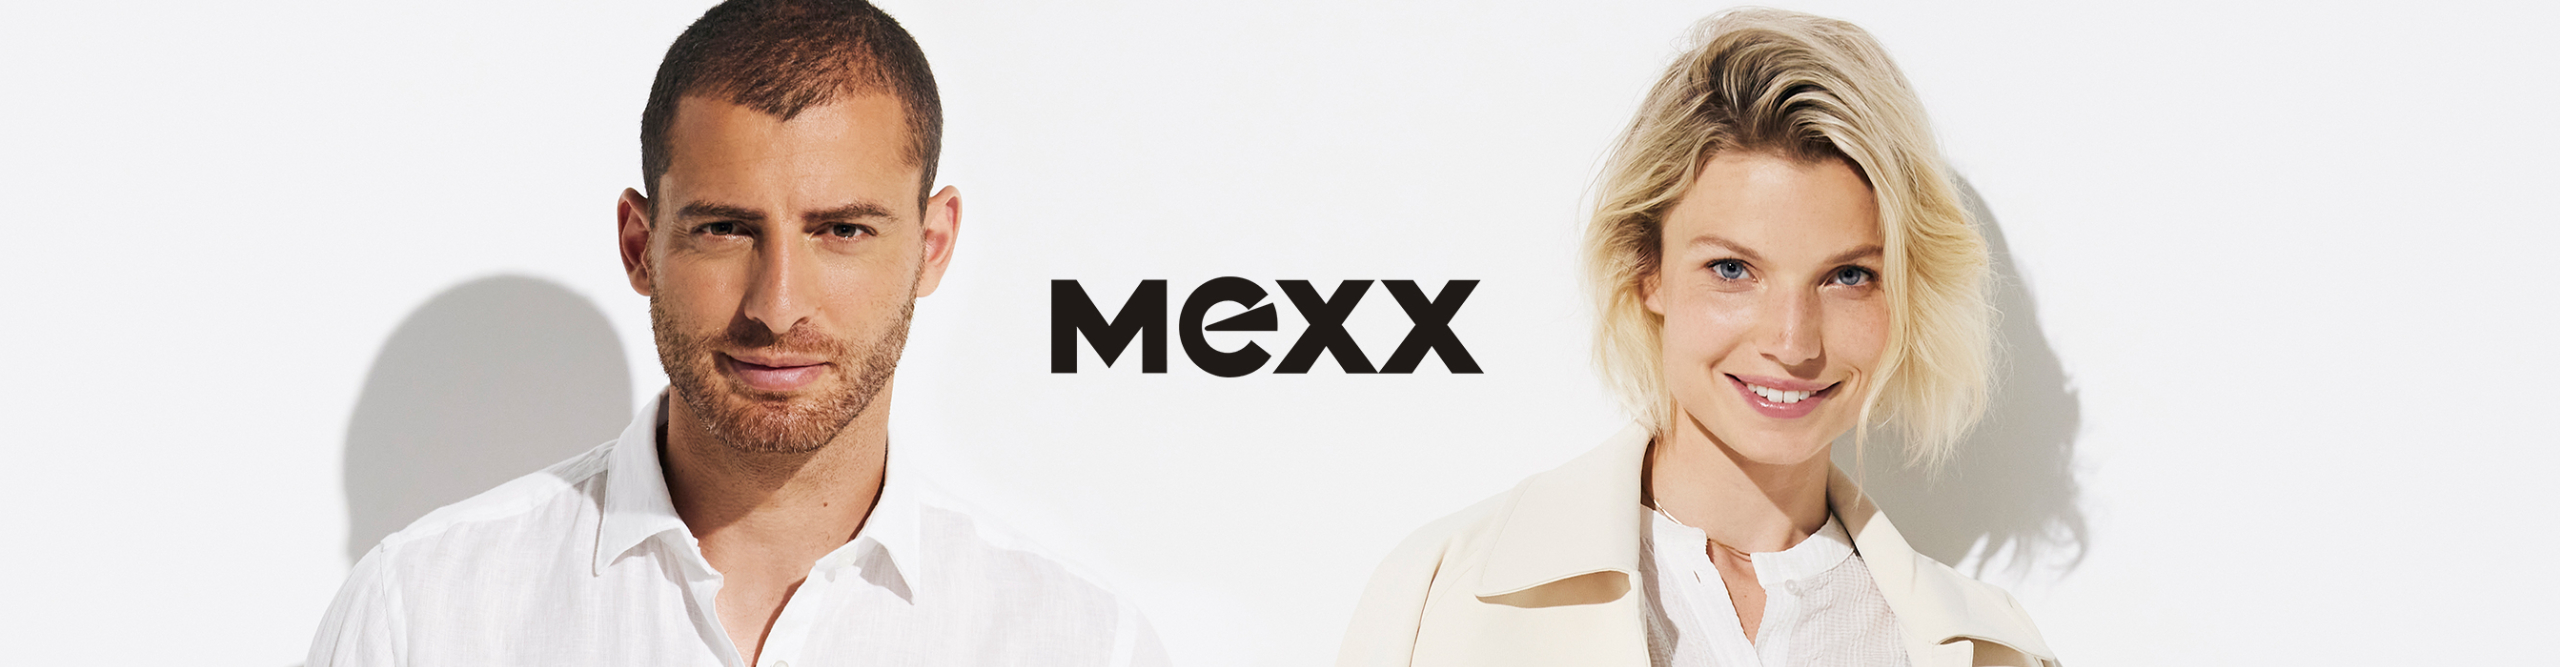 Mexx wholesale collection products